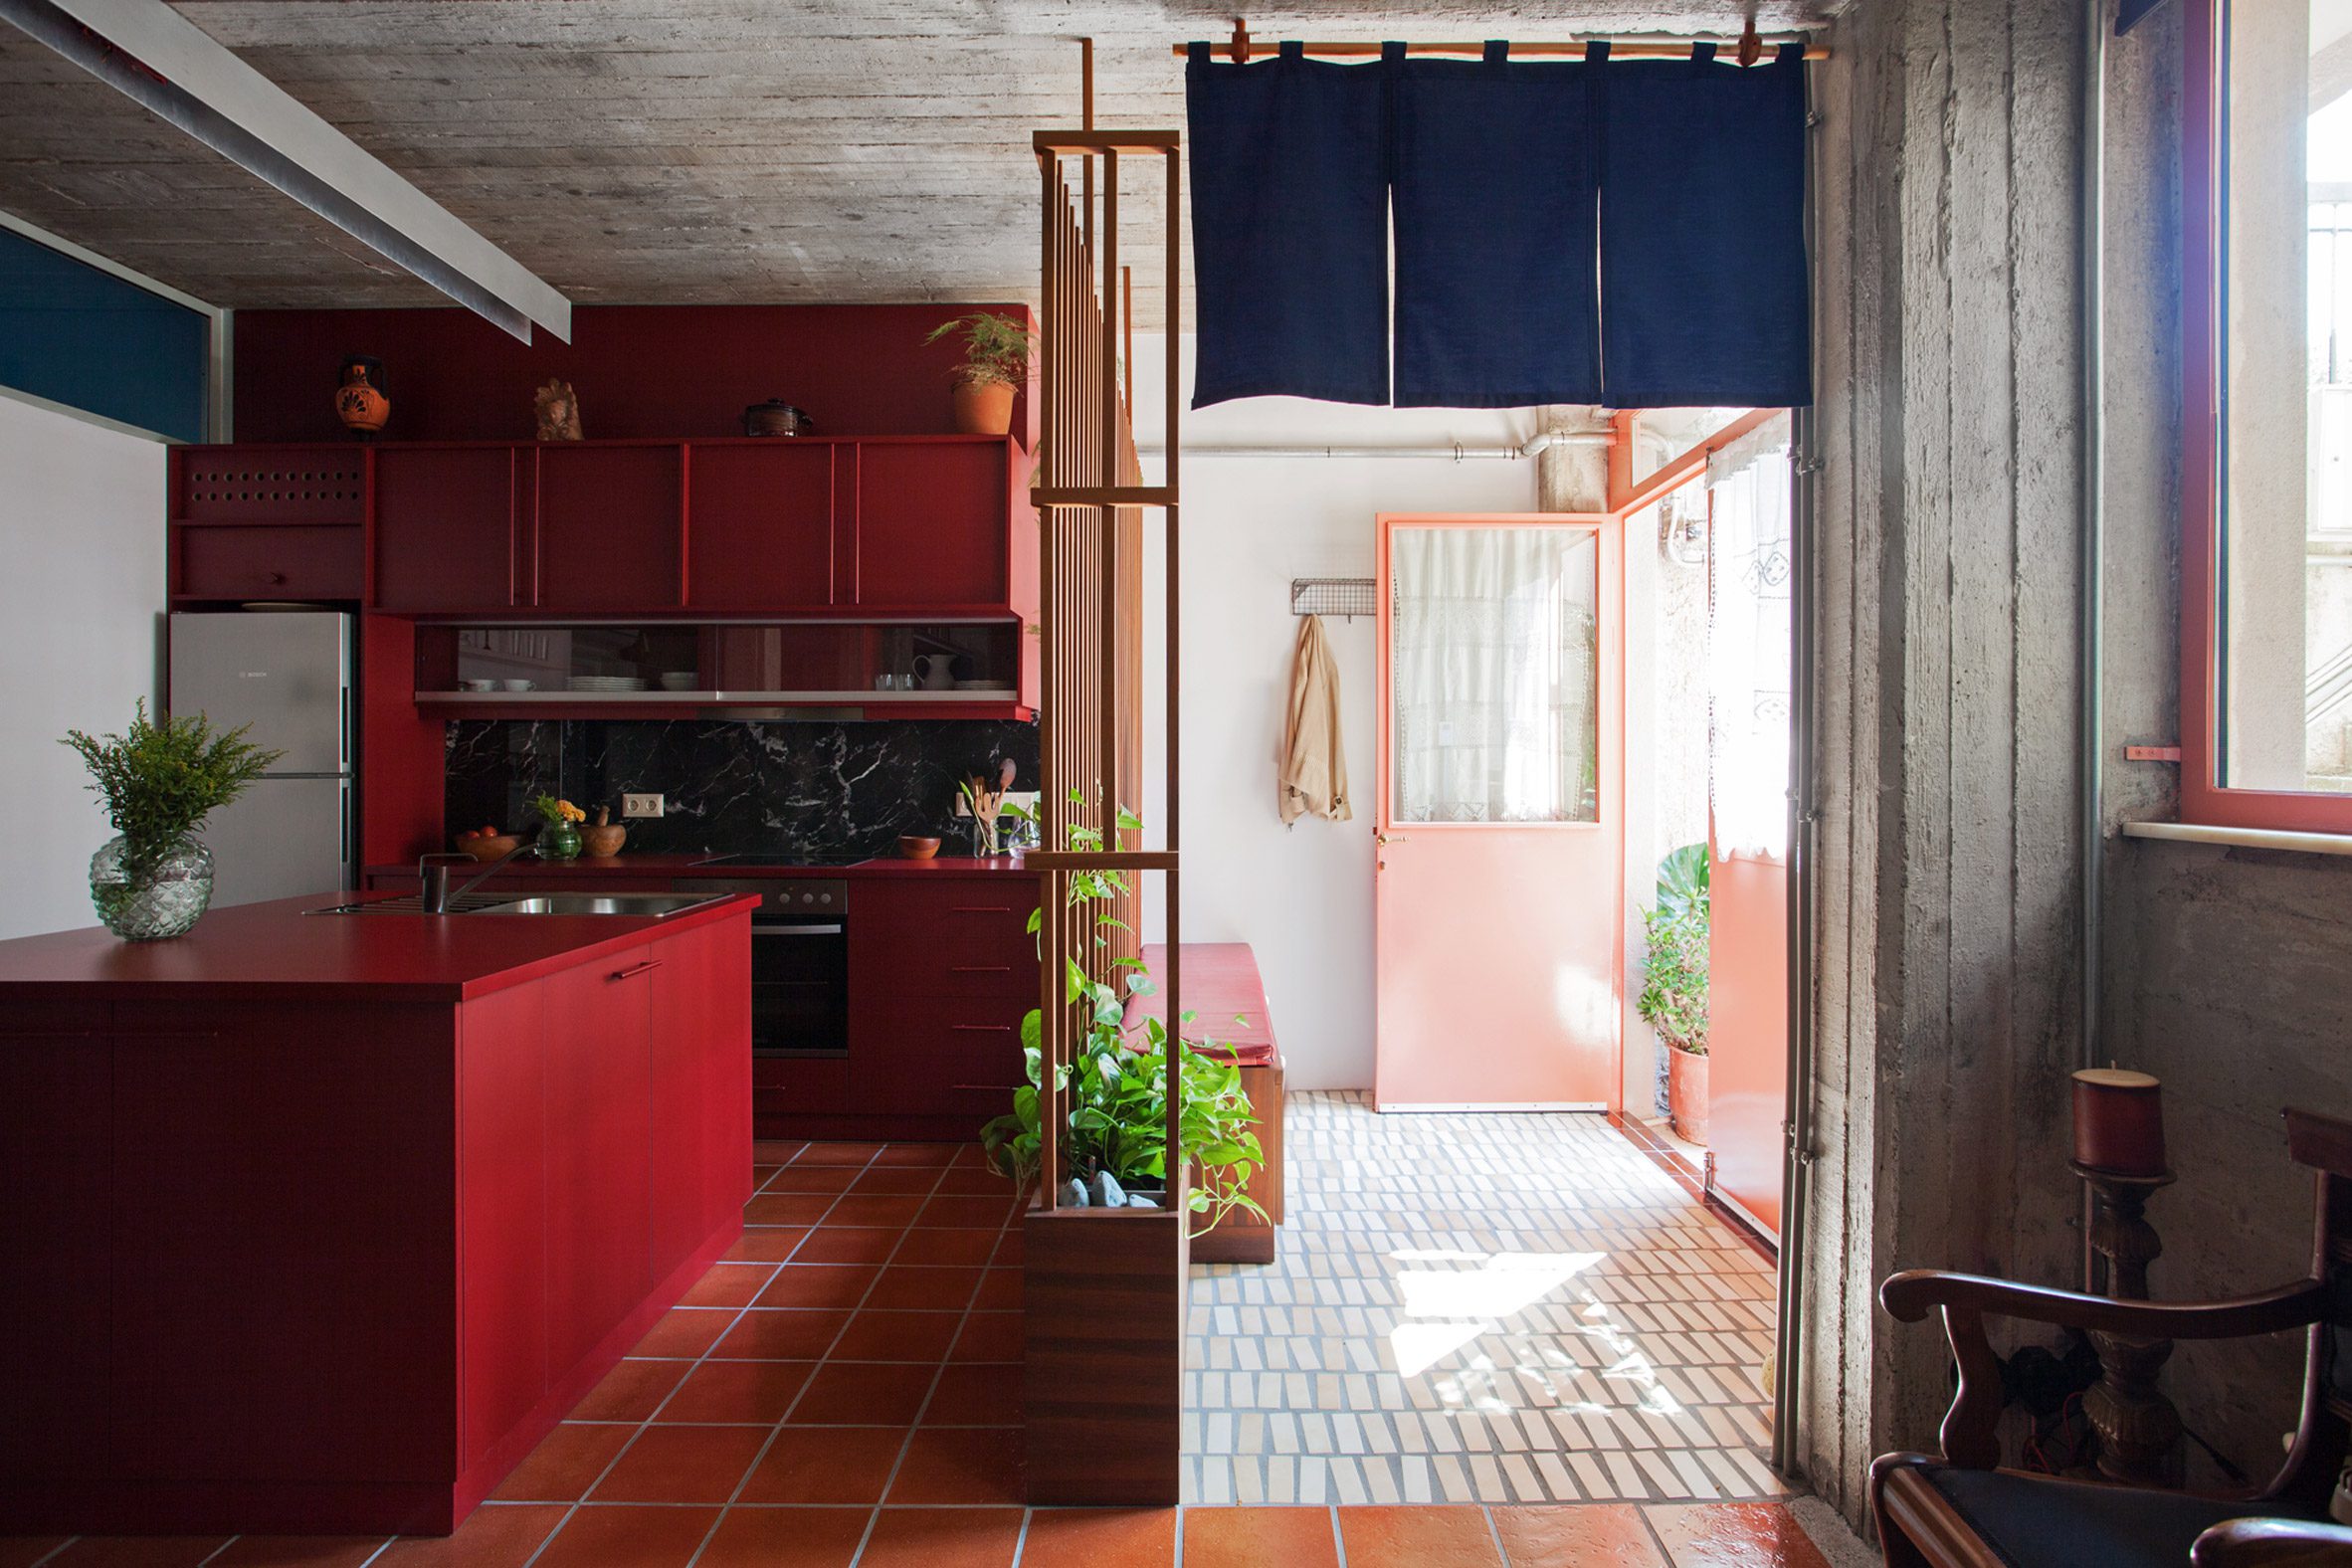 Custom-made red fomica and melamine kitchen